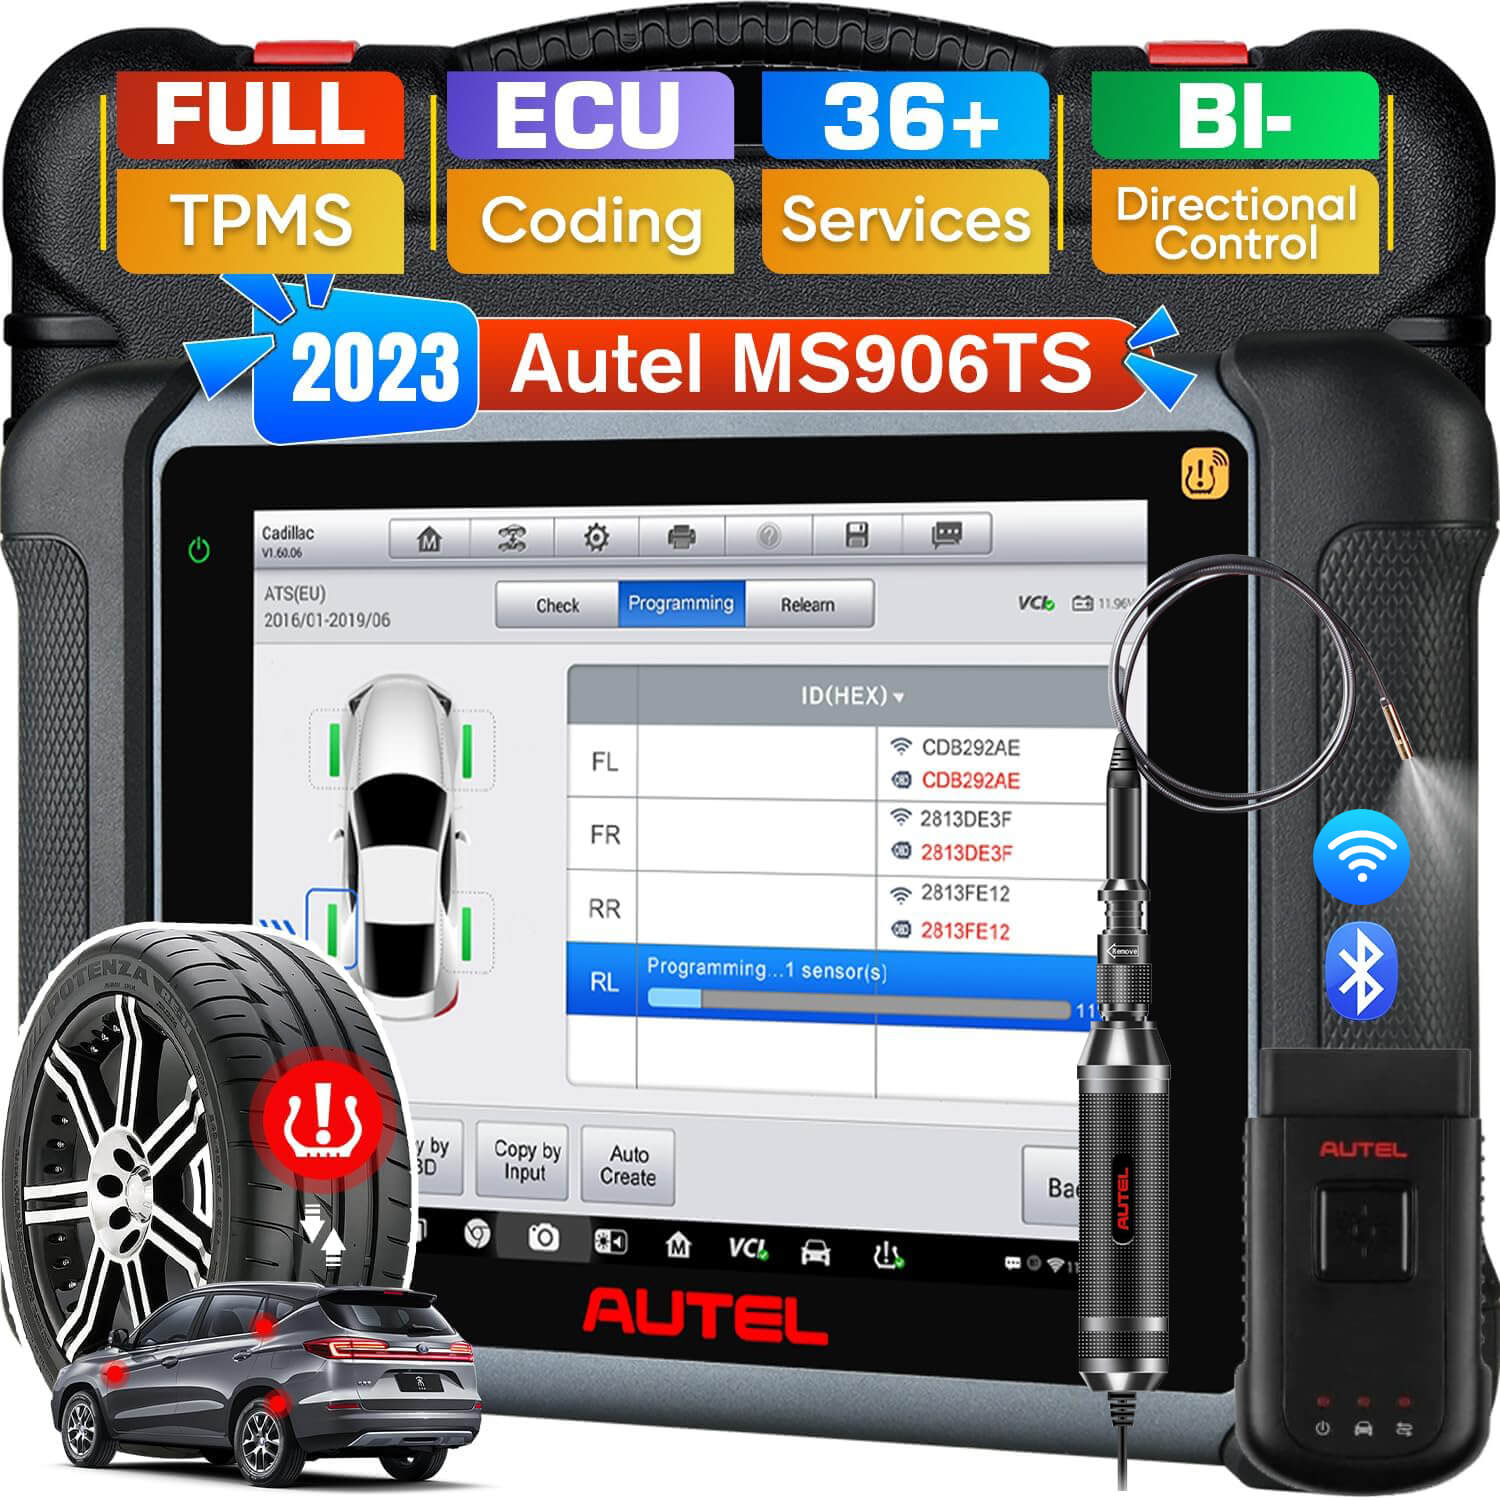 Autel Maxisys MS906TS Bidirectional OBD2 Diagnostic Scanner with TPMS Tool, advanced ECU Coding and Auto Scan 2.0, 36+ Service, Newer of MS906BT/MP808S-TS/MP808TS.